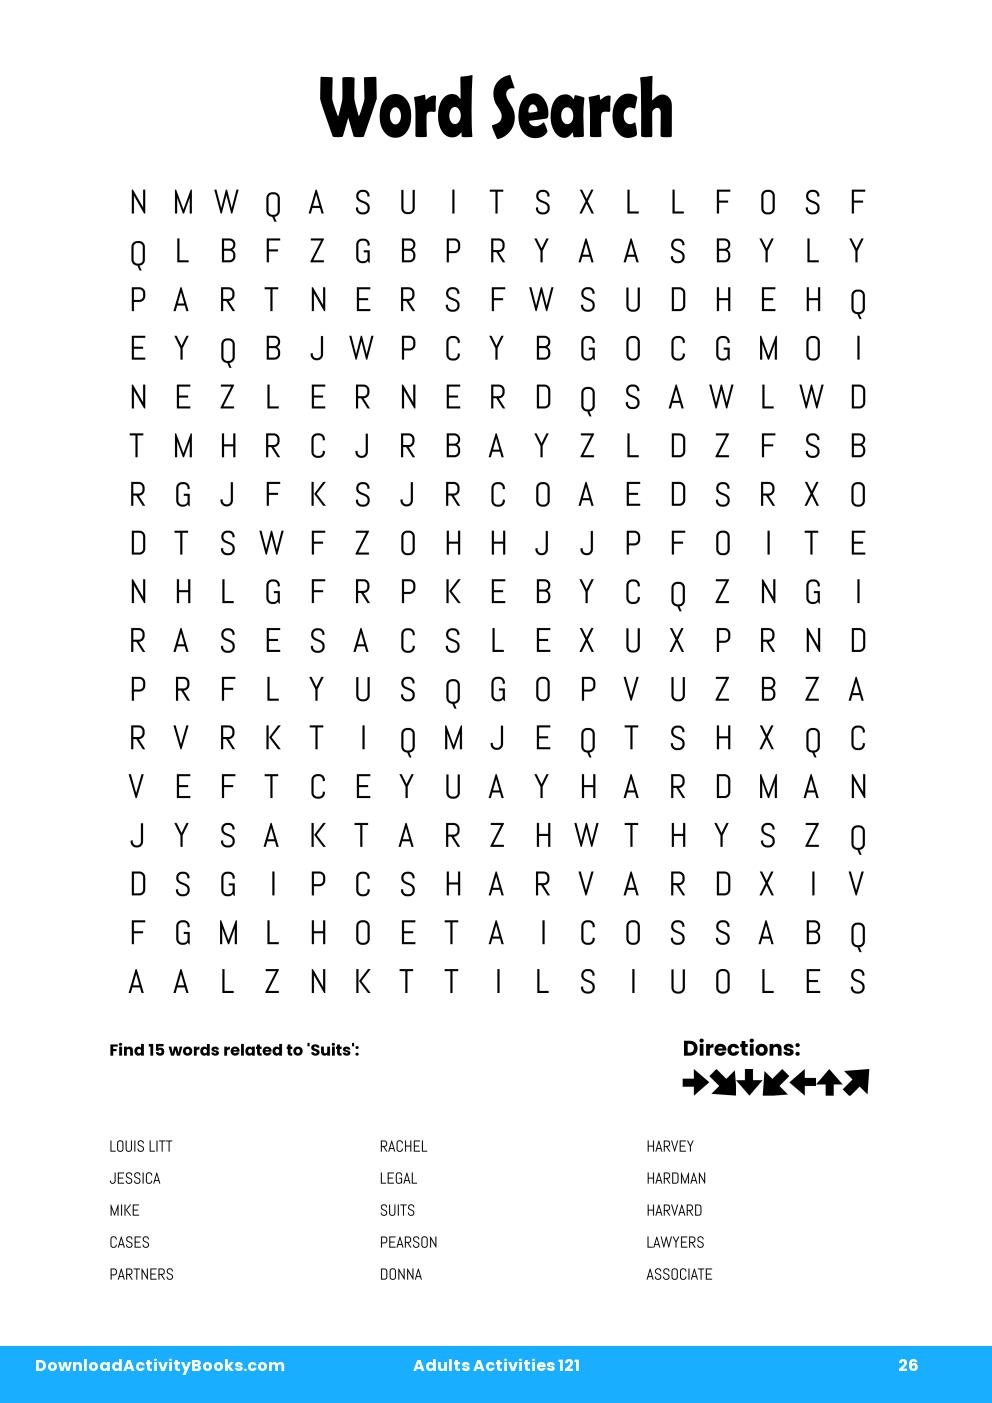 Word Search in Adults Activities 121